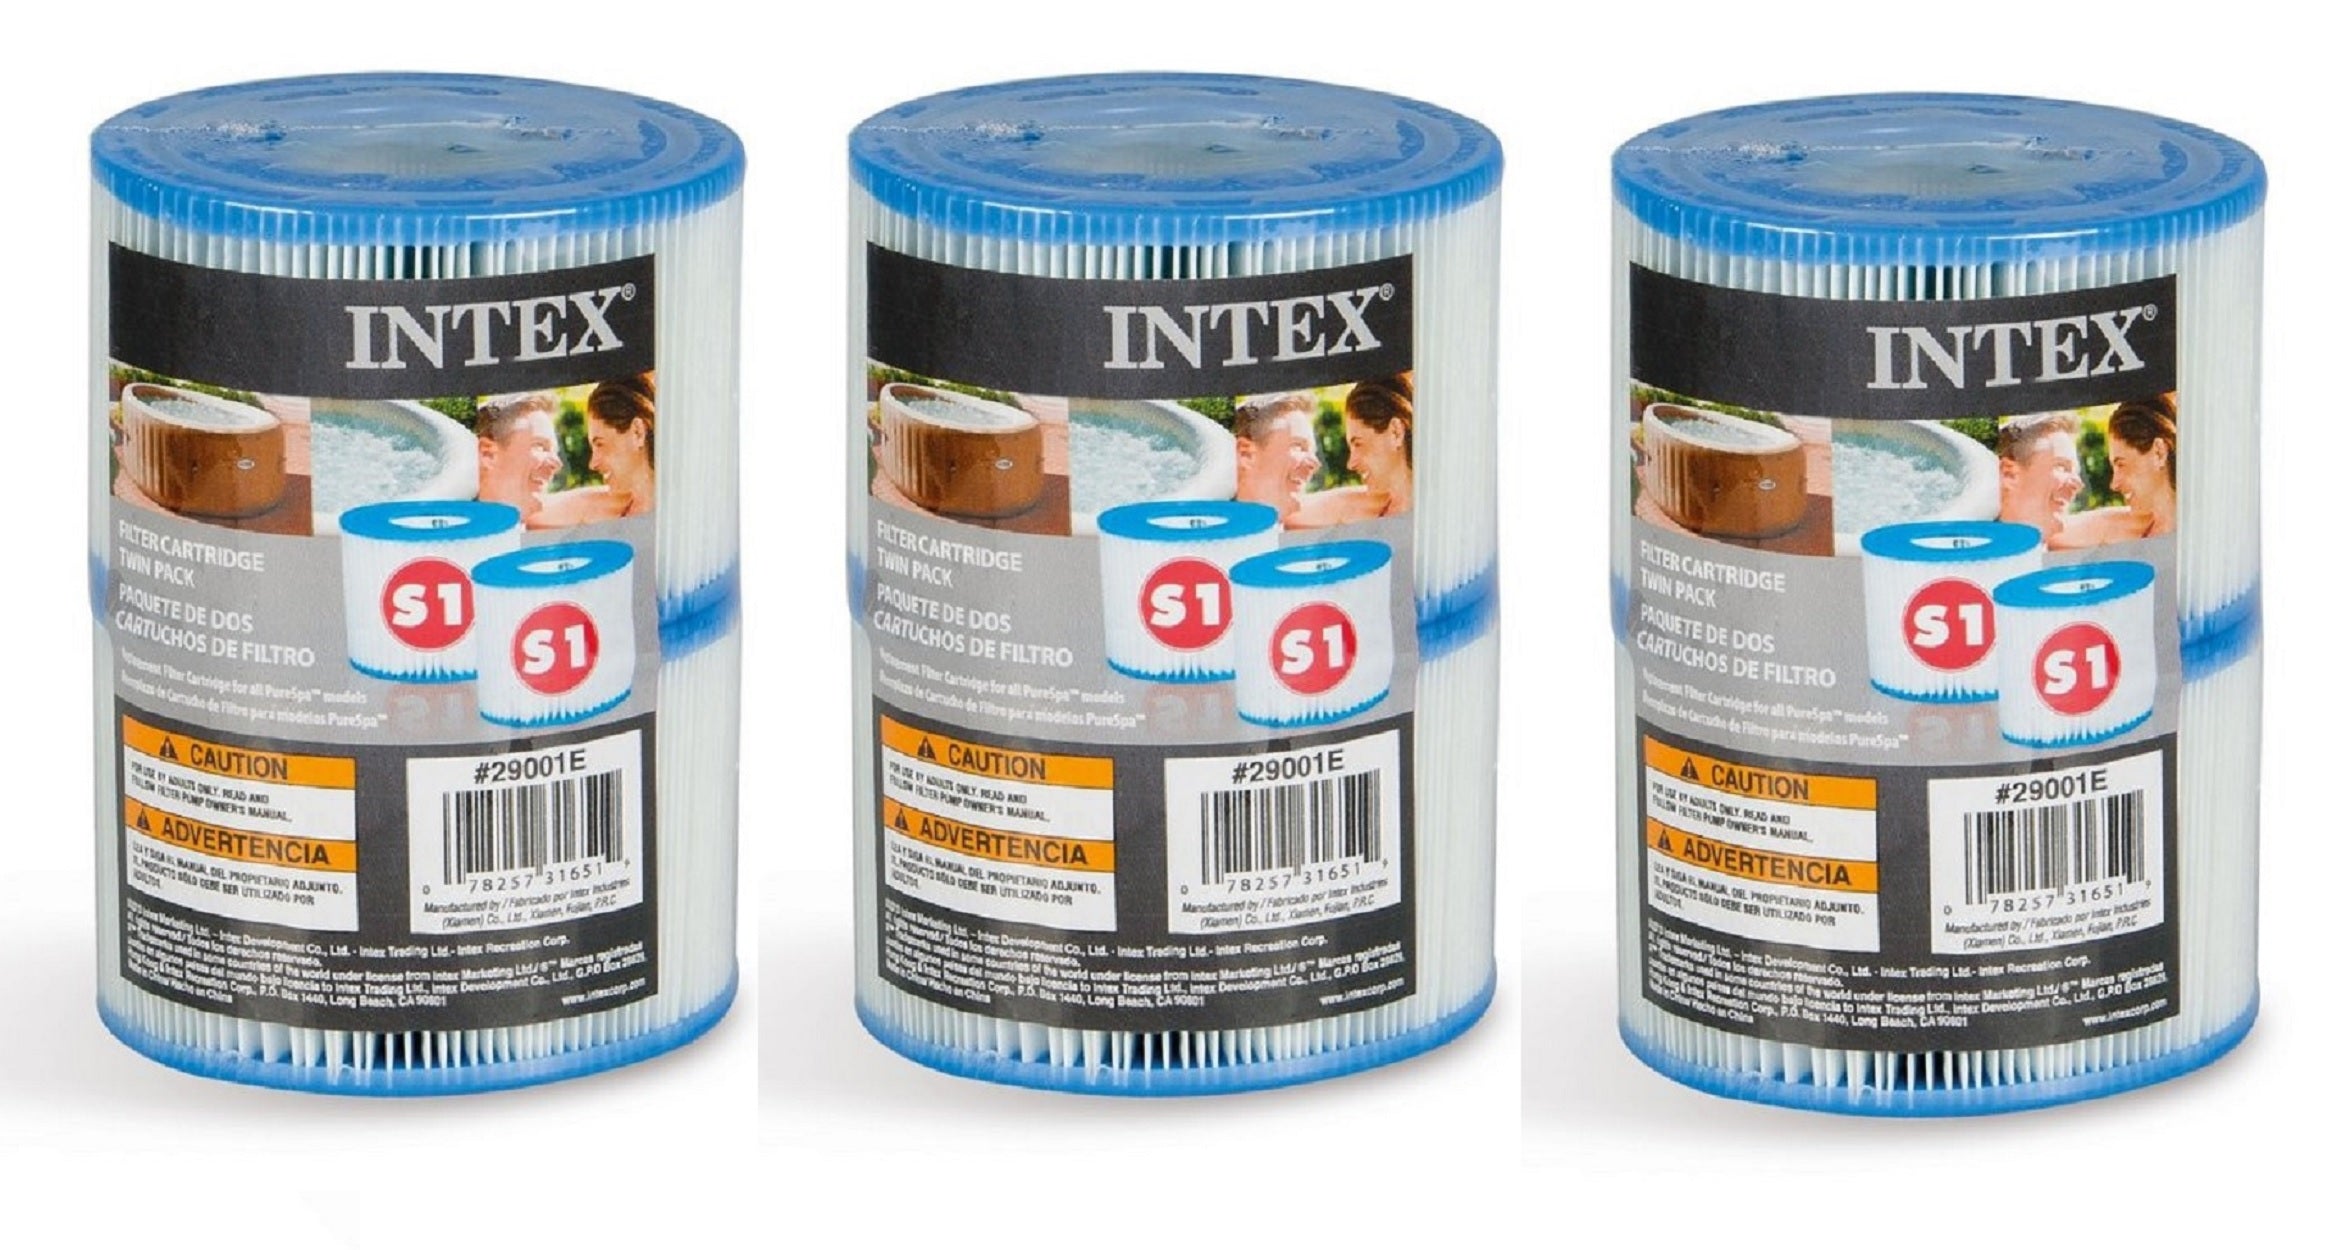 Intex PureSpa Type S1 Hot Tub Replacement Filter Cartridge 6-Pack